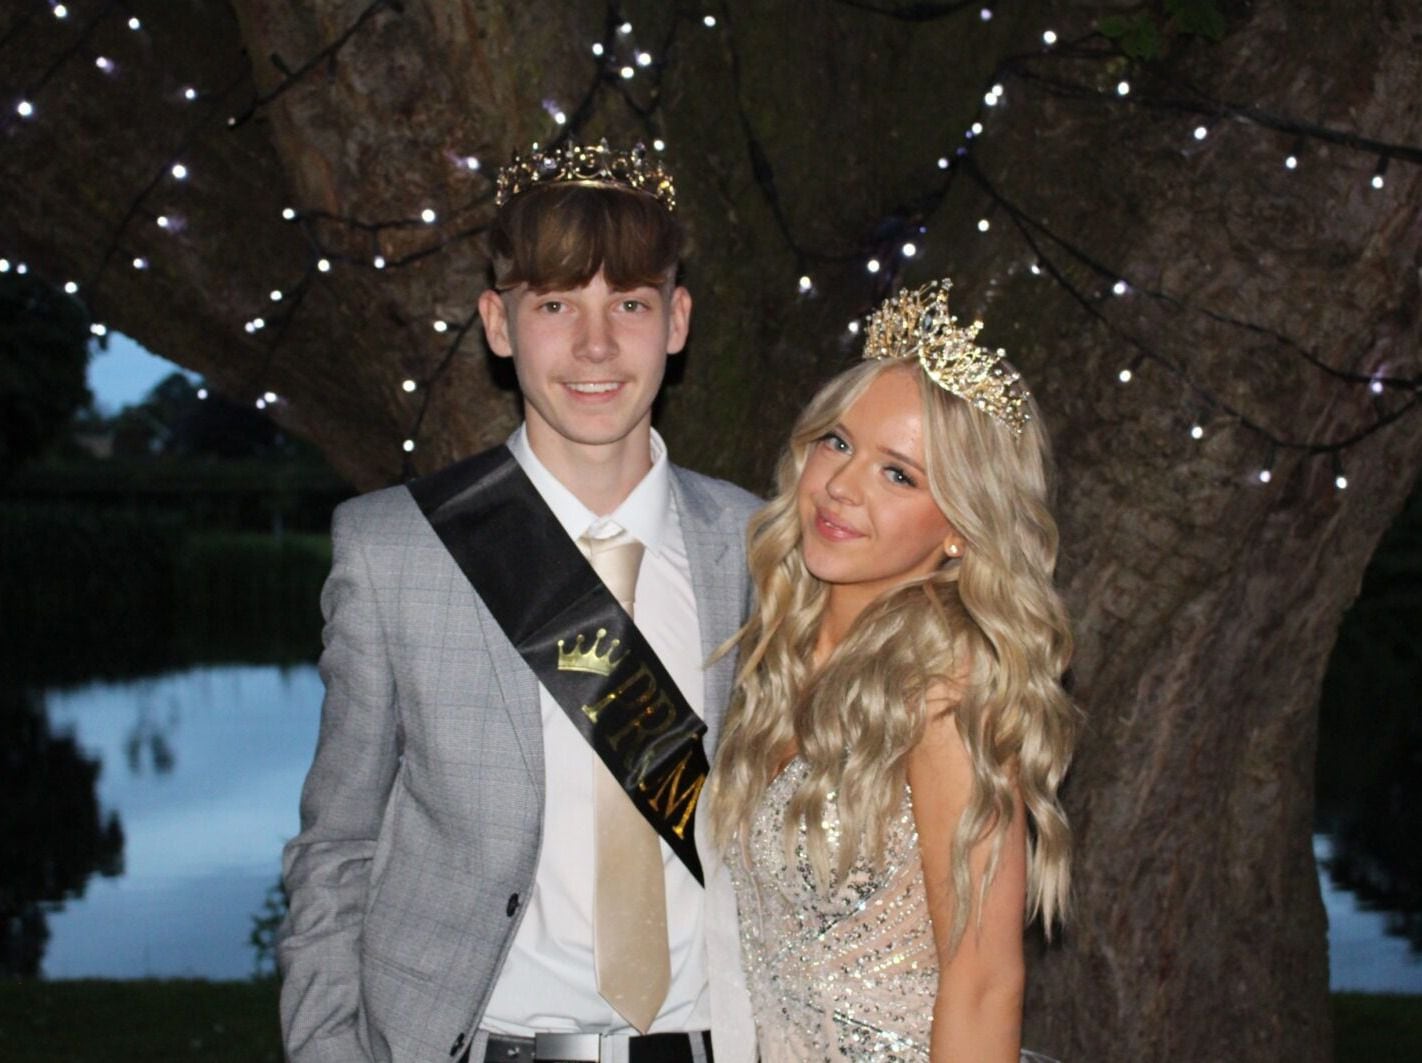 Penkridge school celebrates learning and achievement together at end of year prom 